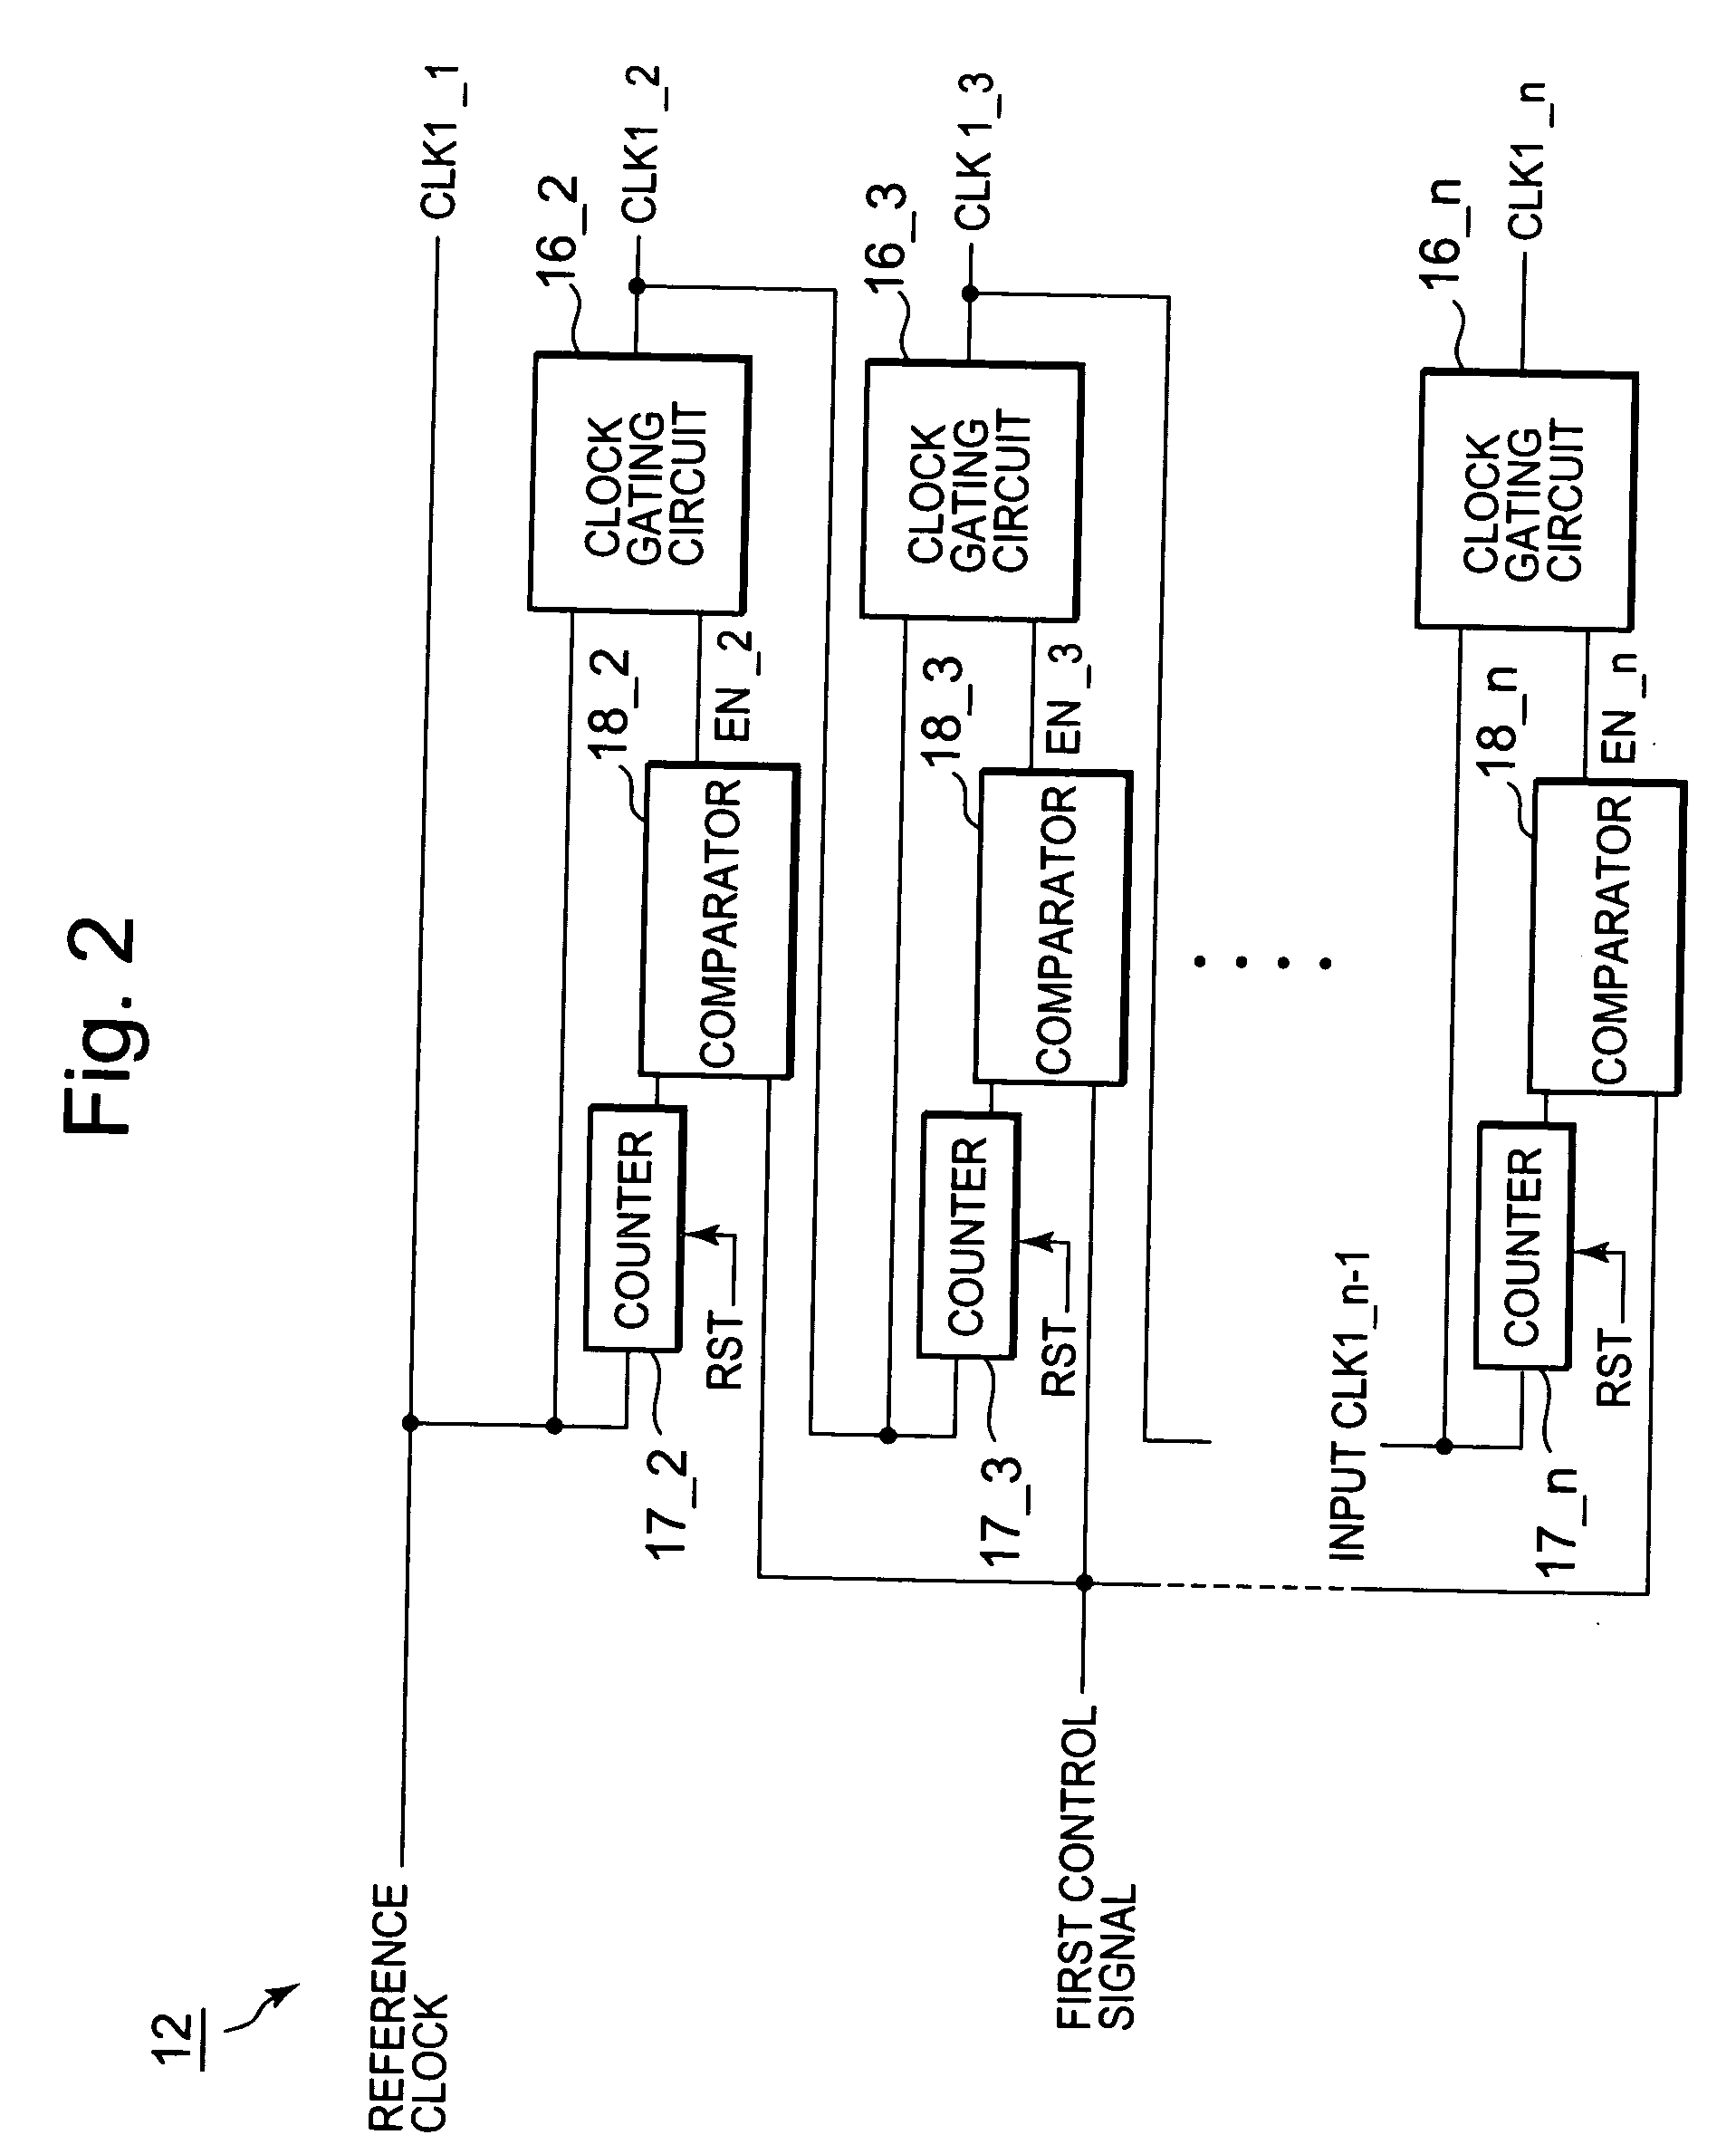 Test pattern generation circuit having plural pseudo random number generation circuits supplied with clock signals at different timing respectively